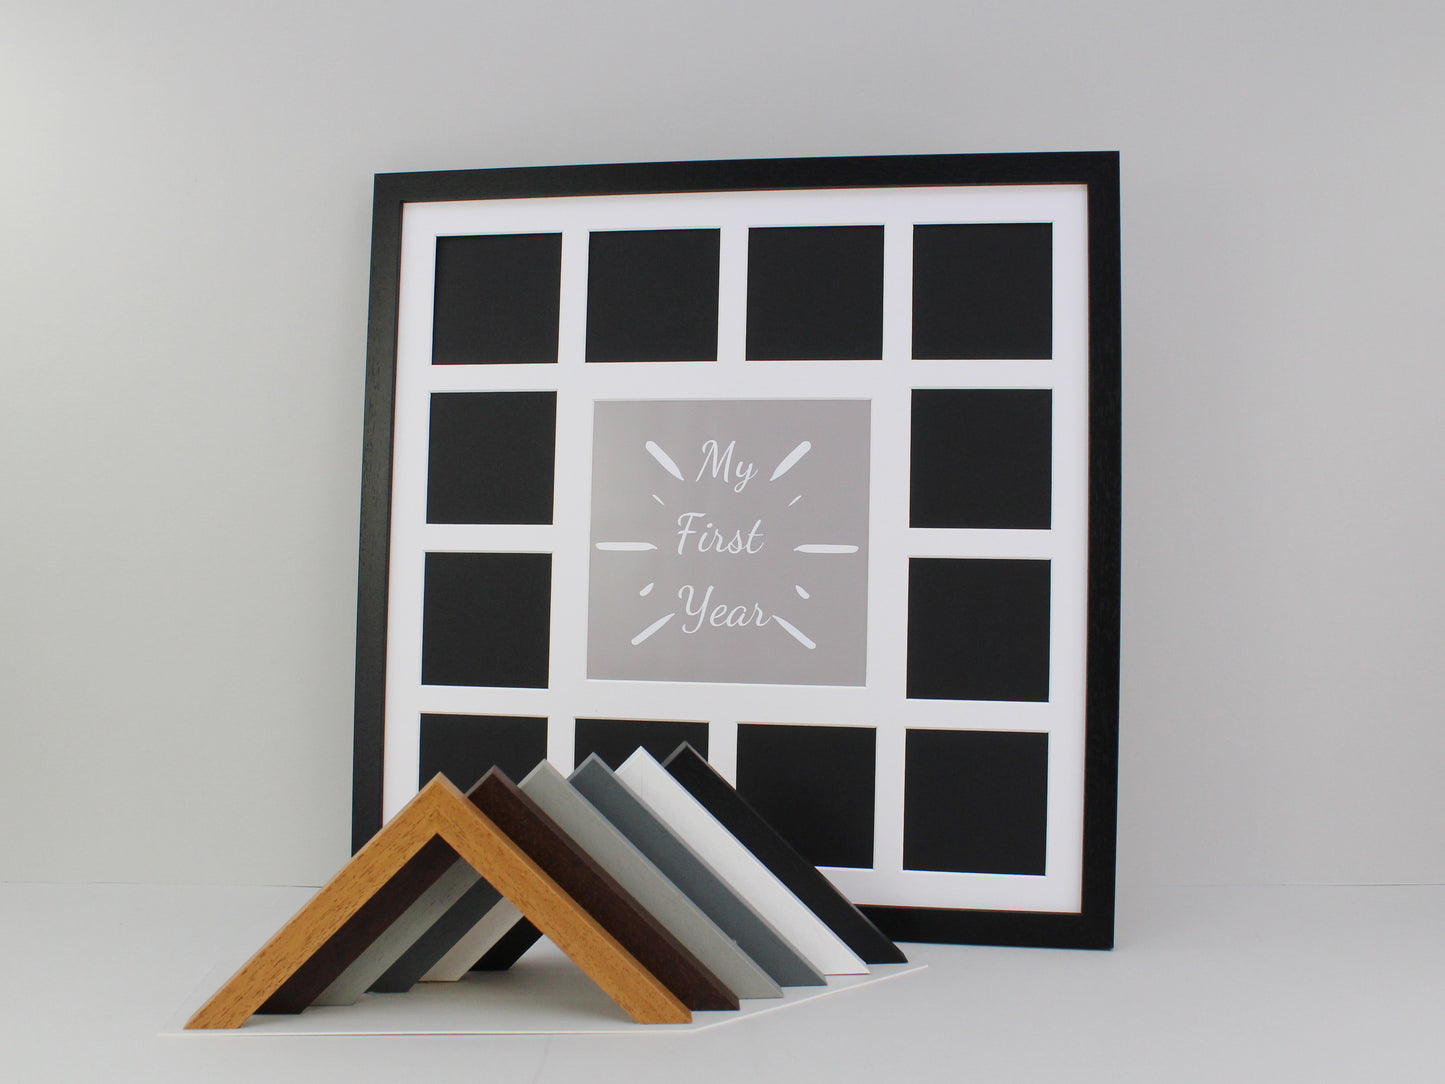 Baby's First Year Photo Frame - Multi Aperture Frame. 50x50cm Frame with one large aperture and twelve smaller apertures, one for each month!